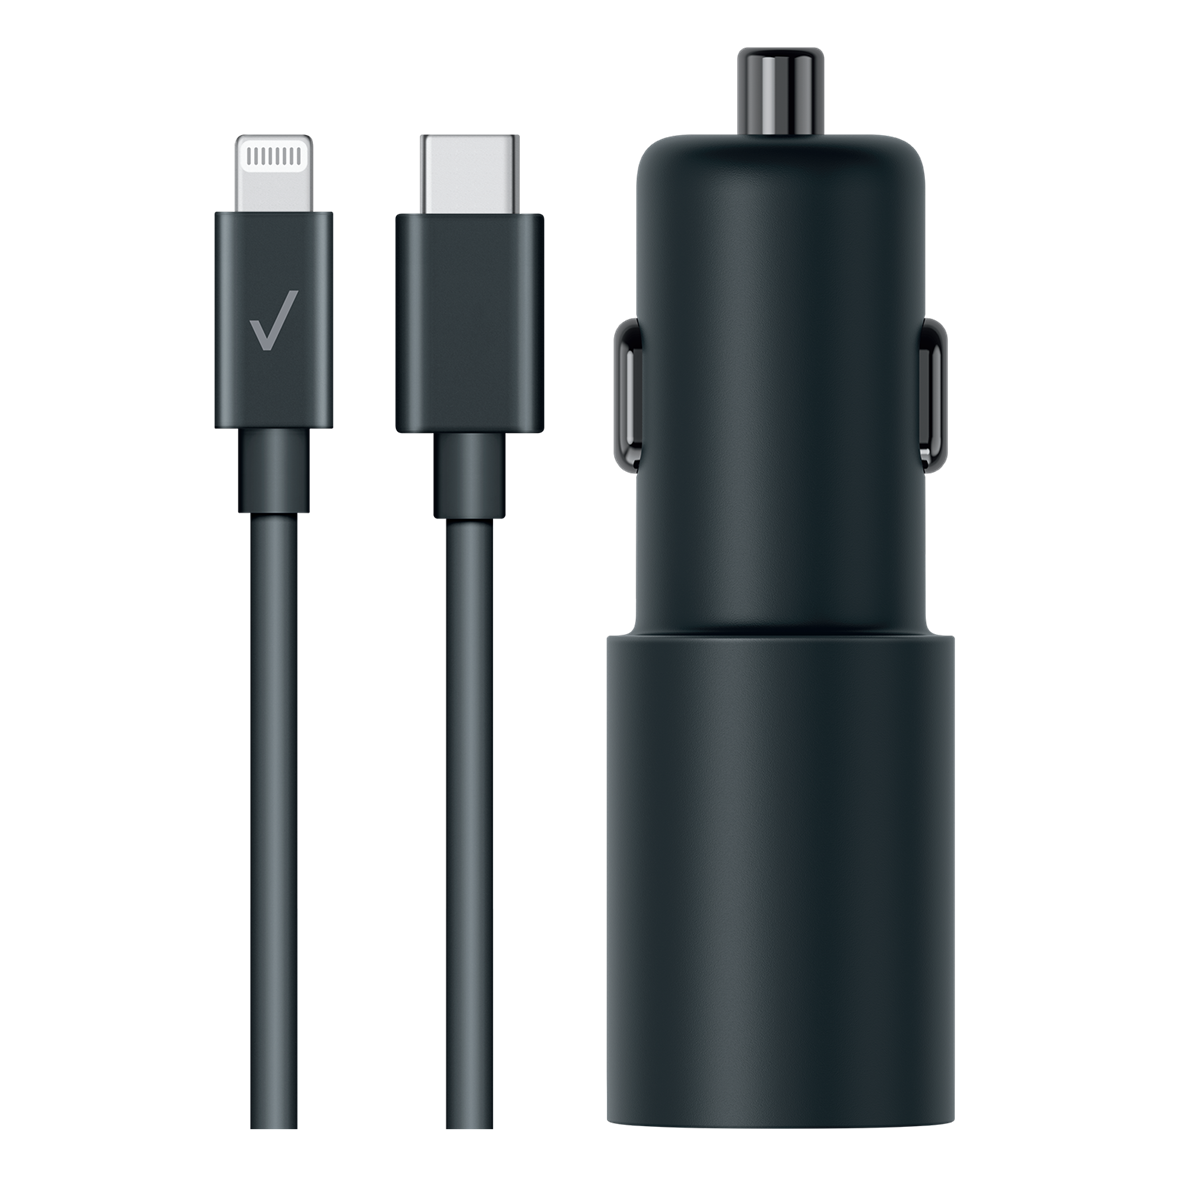 Syncwire USB C Car Charger for $17 - SW-XC611